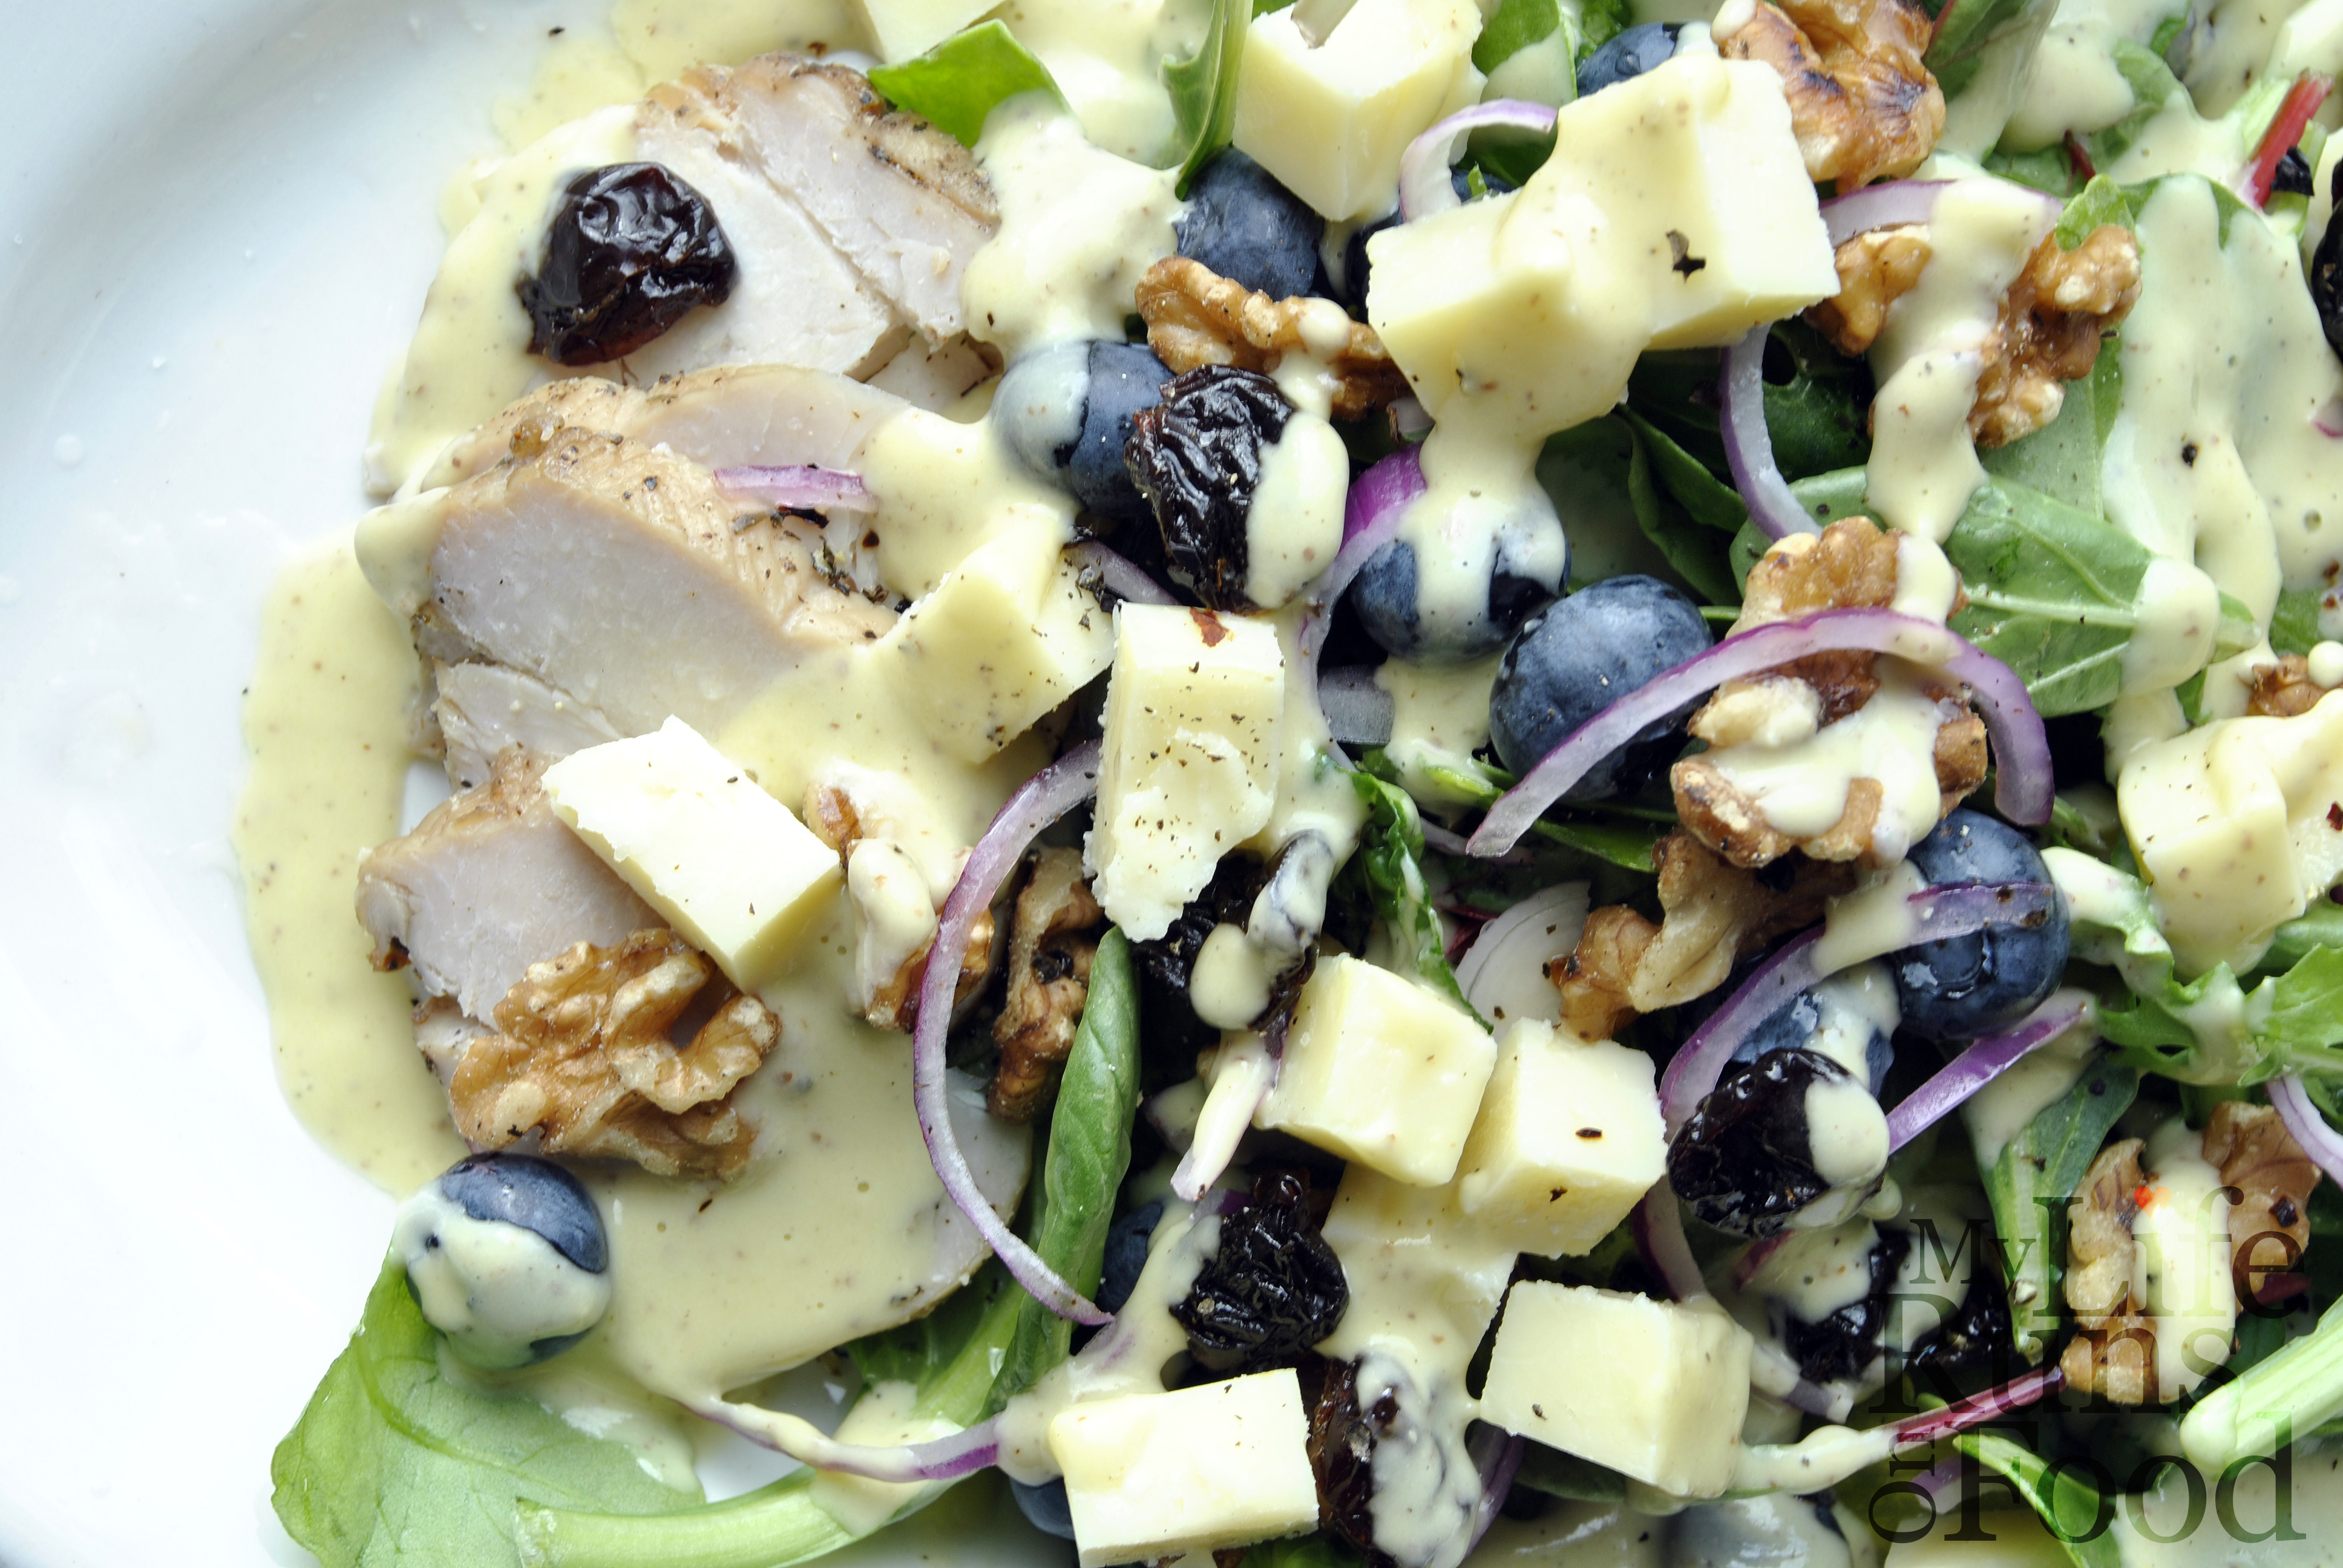 Cheddar and Smoked Chicken Salad with Creamy Roasted Shallot Vinaigrette